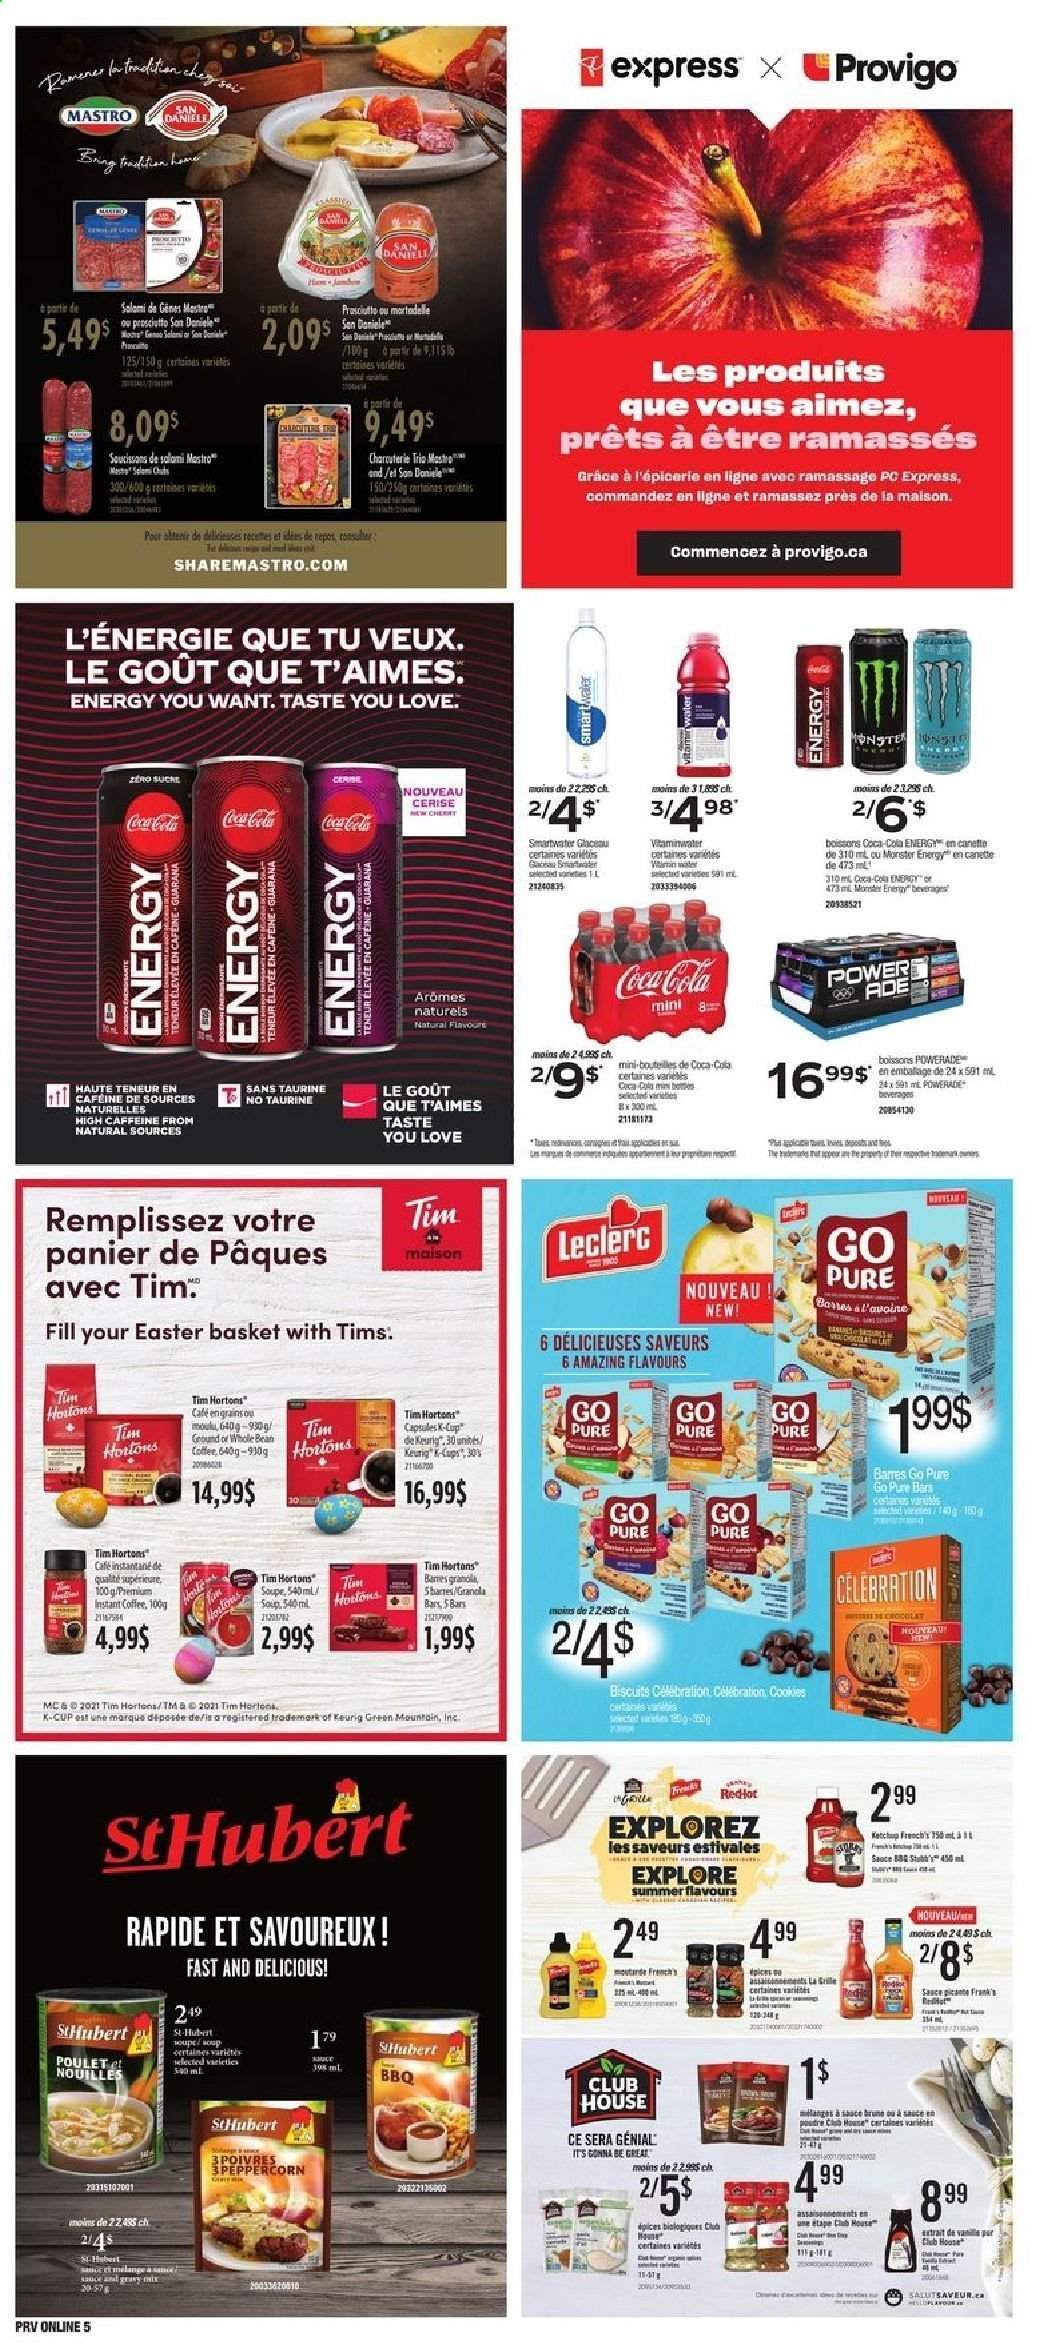 thumbnail - Provigo Flyer - March 25, 2021 - March 31, 2021 - Sales products - Ace, sauce, salami, prosciutto, cookies, Celebration, biscuit, granola bar, Coca-Cola, Powerade, Smartwater, instant coffee, coffee capsules, K-Cups, Keurig. Page 11.